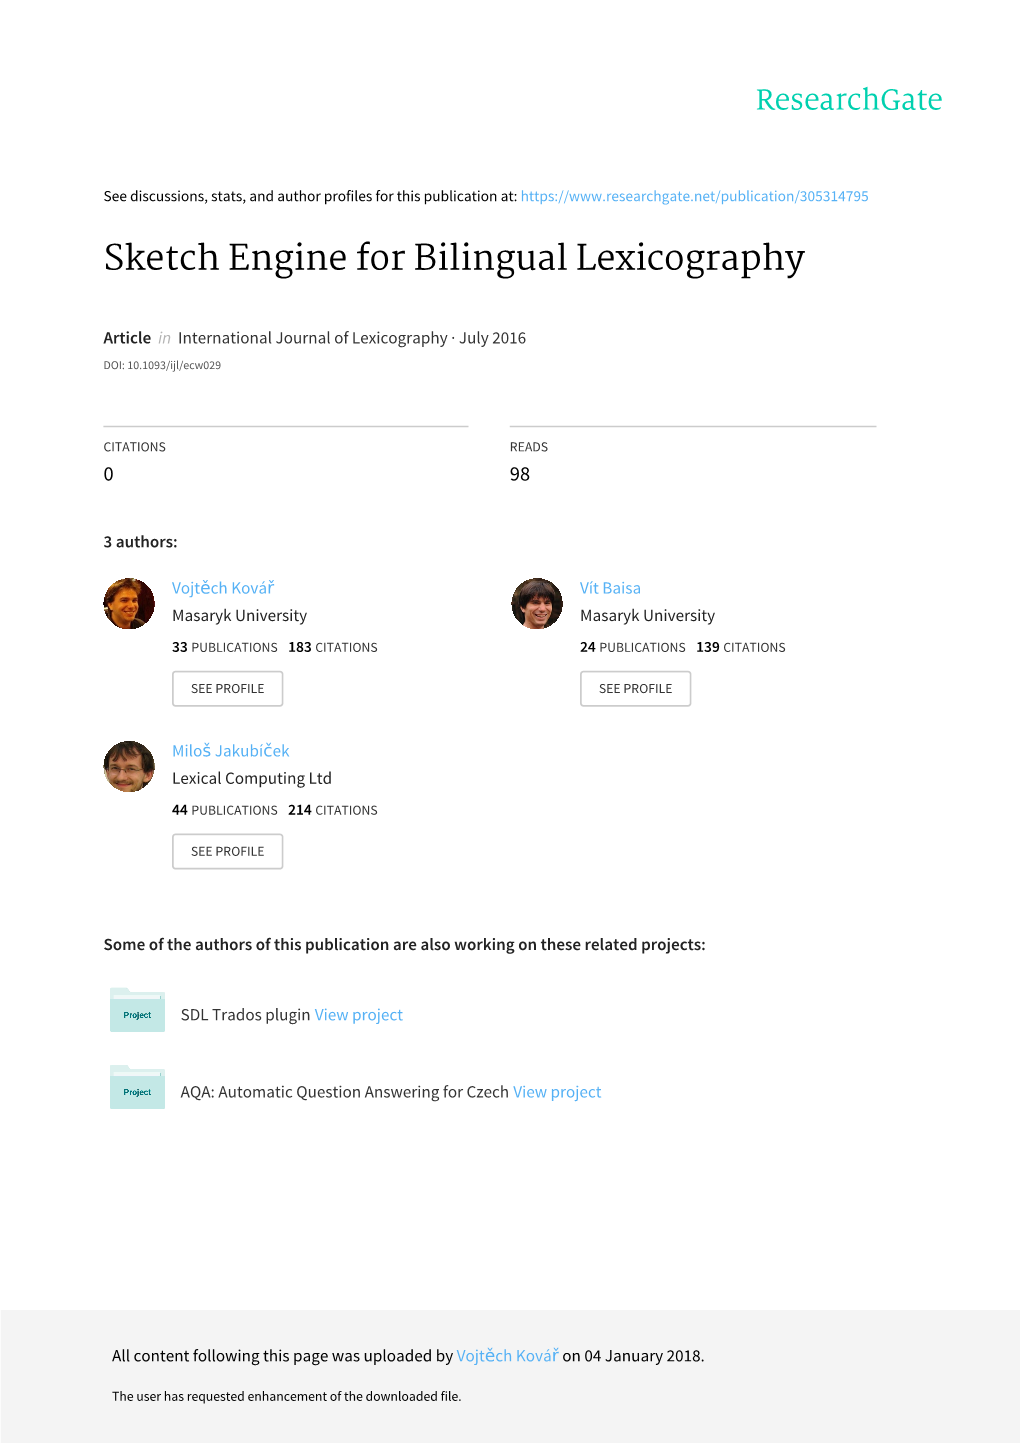 Sketch Engine for Bilingual Lexicography